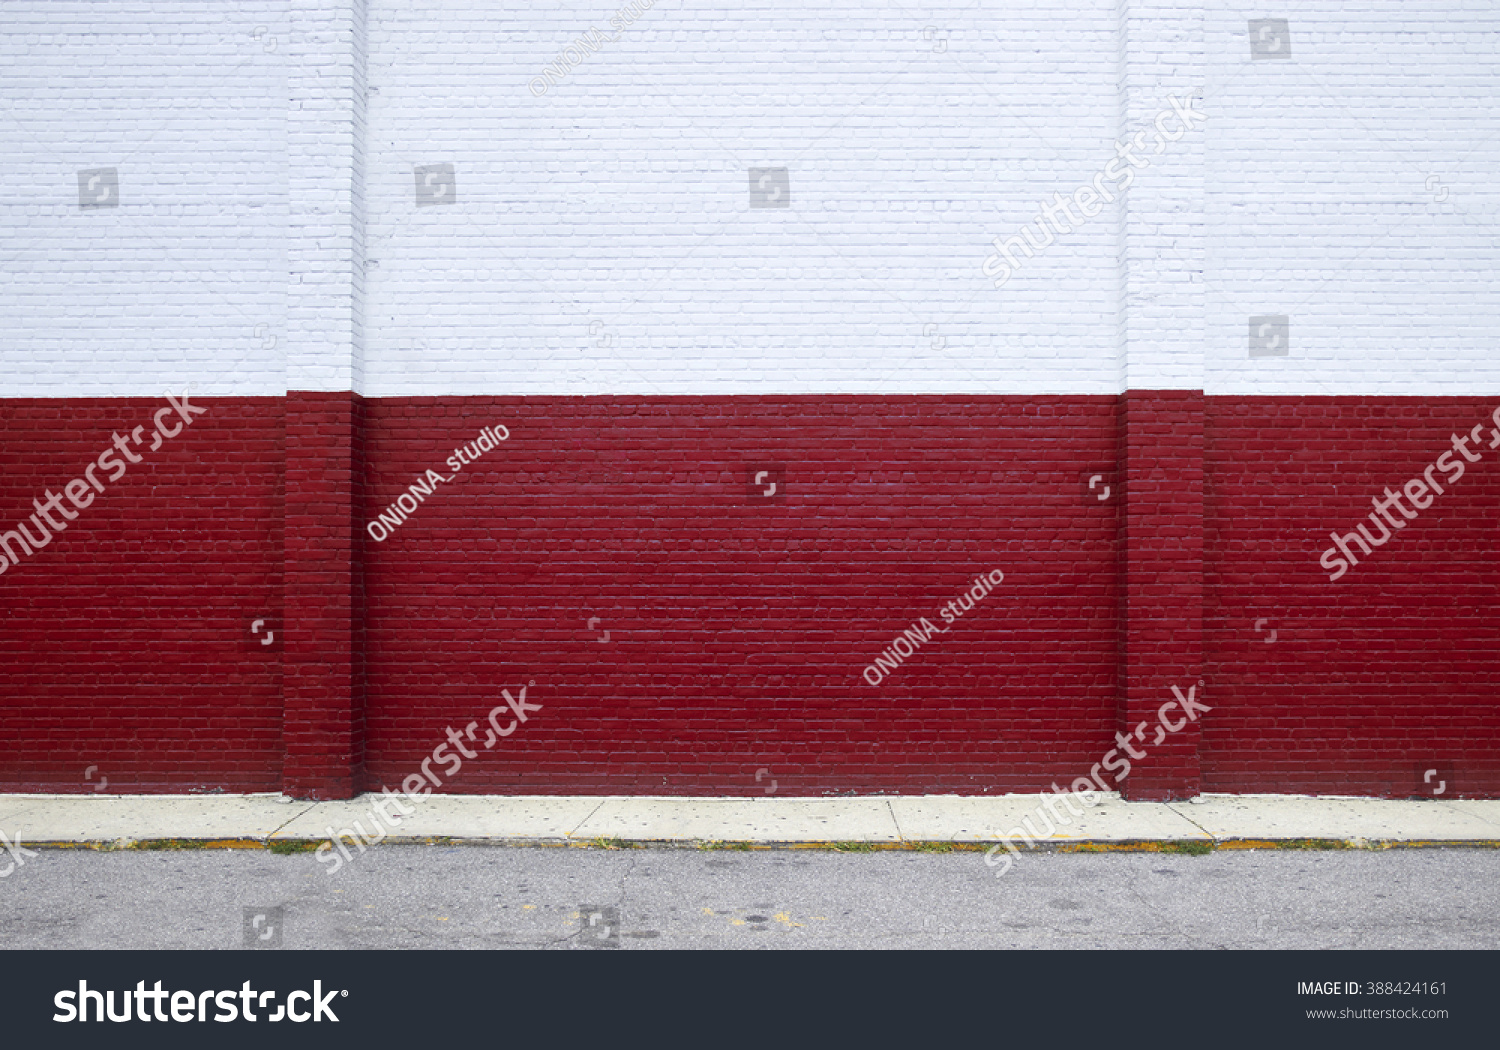 Painted on red brick wall on the street #388424161